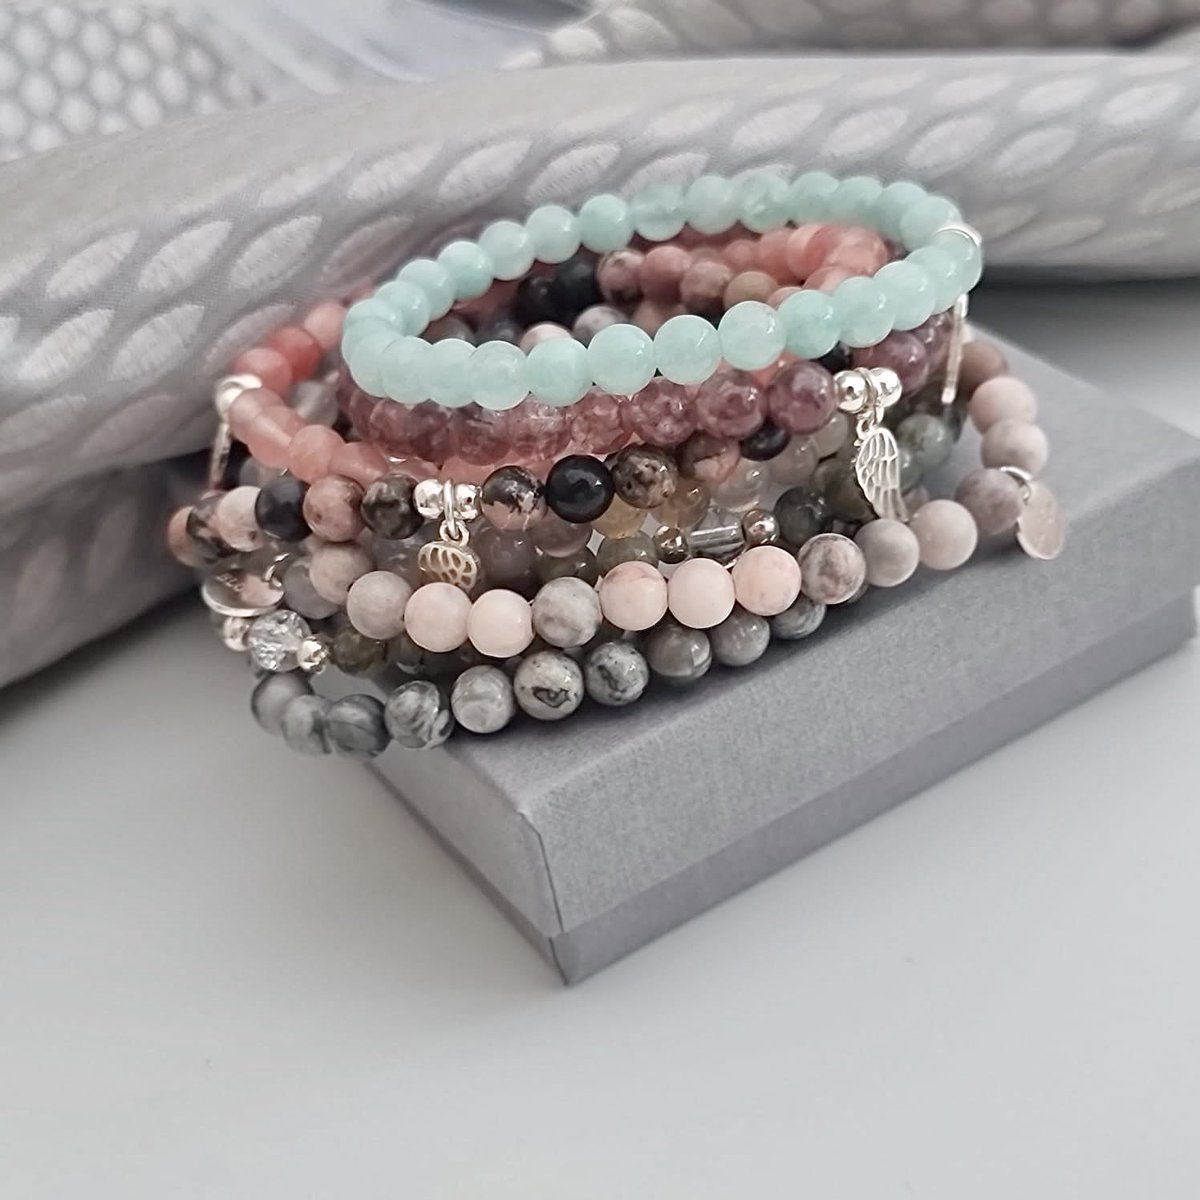 Can’t decide which one is  my favourite 😍 #bracelets #braceletstacking #gemstones #gemstonebracelets #Healing #beads #instagramshop #mumsinbusiness #mums #love #Accessories #beautiful #braceletshandmade #crystalbracelets #musthaves #jewellery